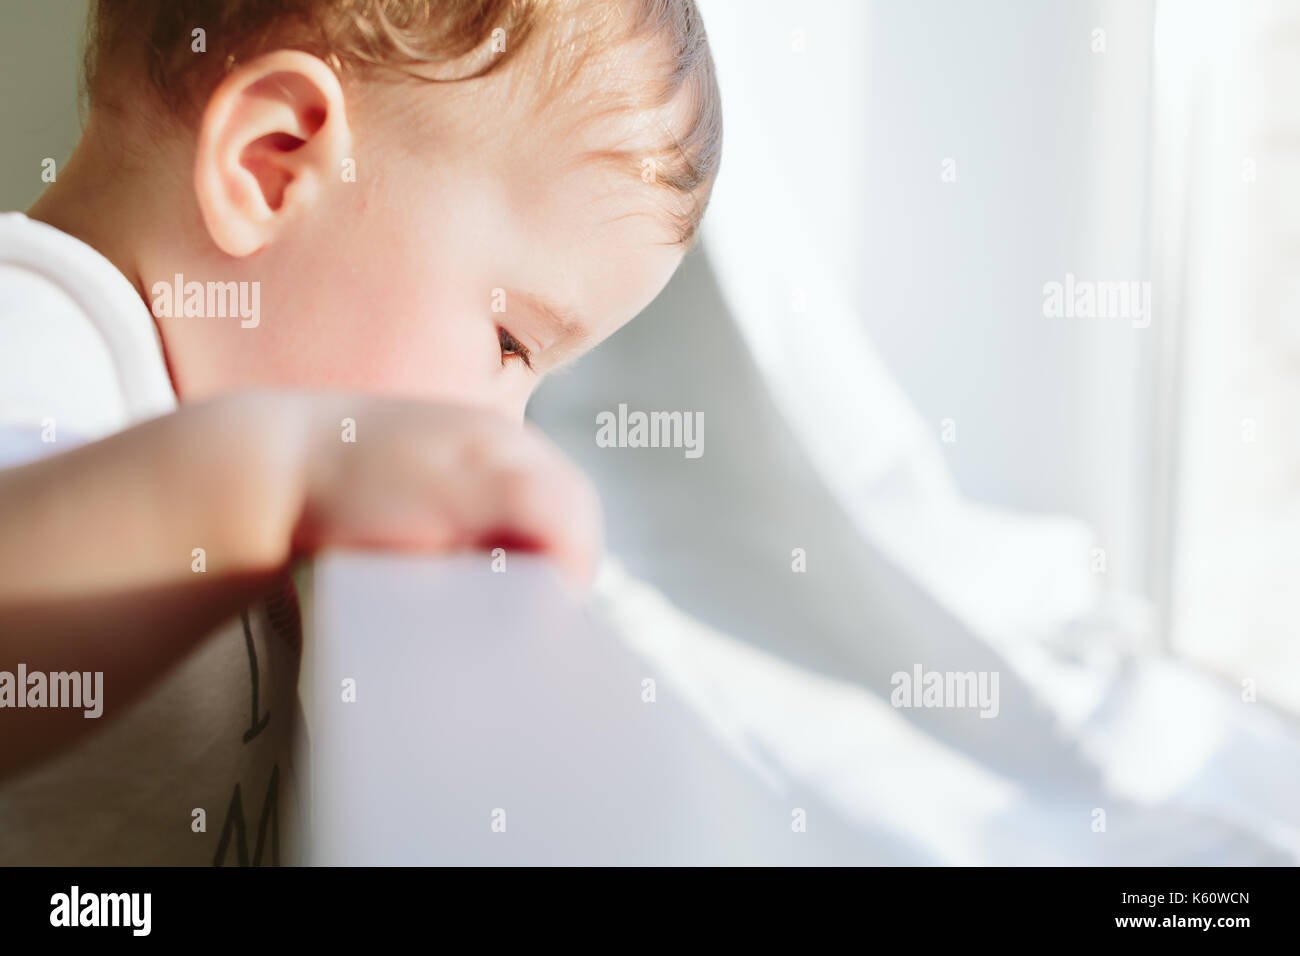 Little baby holds onto the bed and looks somewhere. Stock Photo